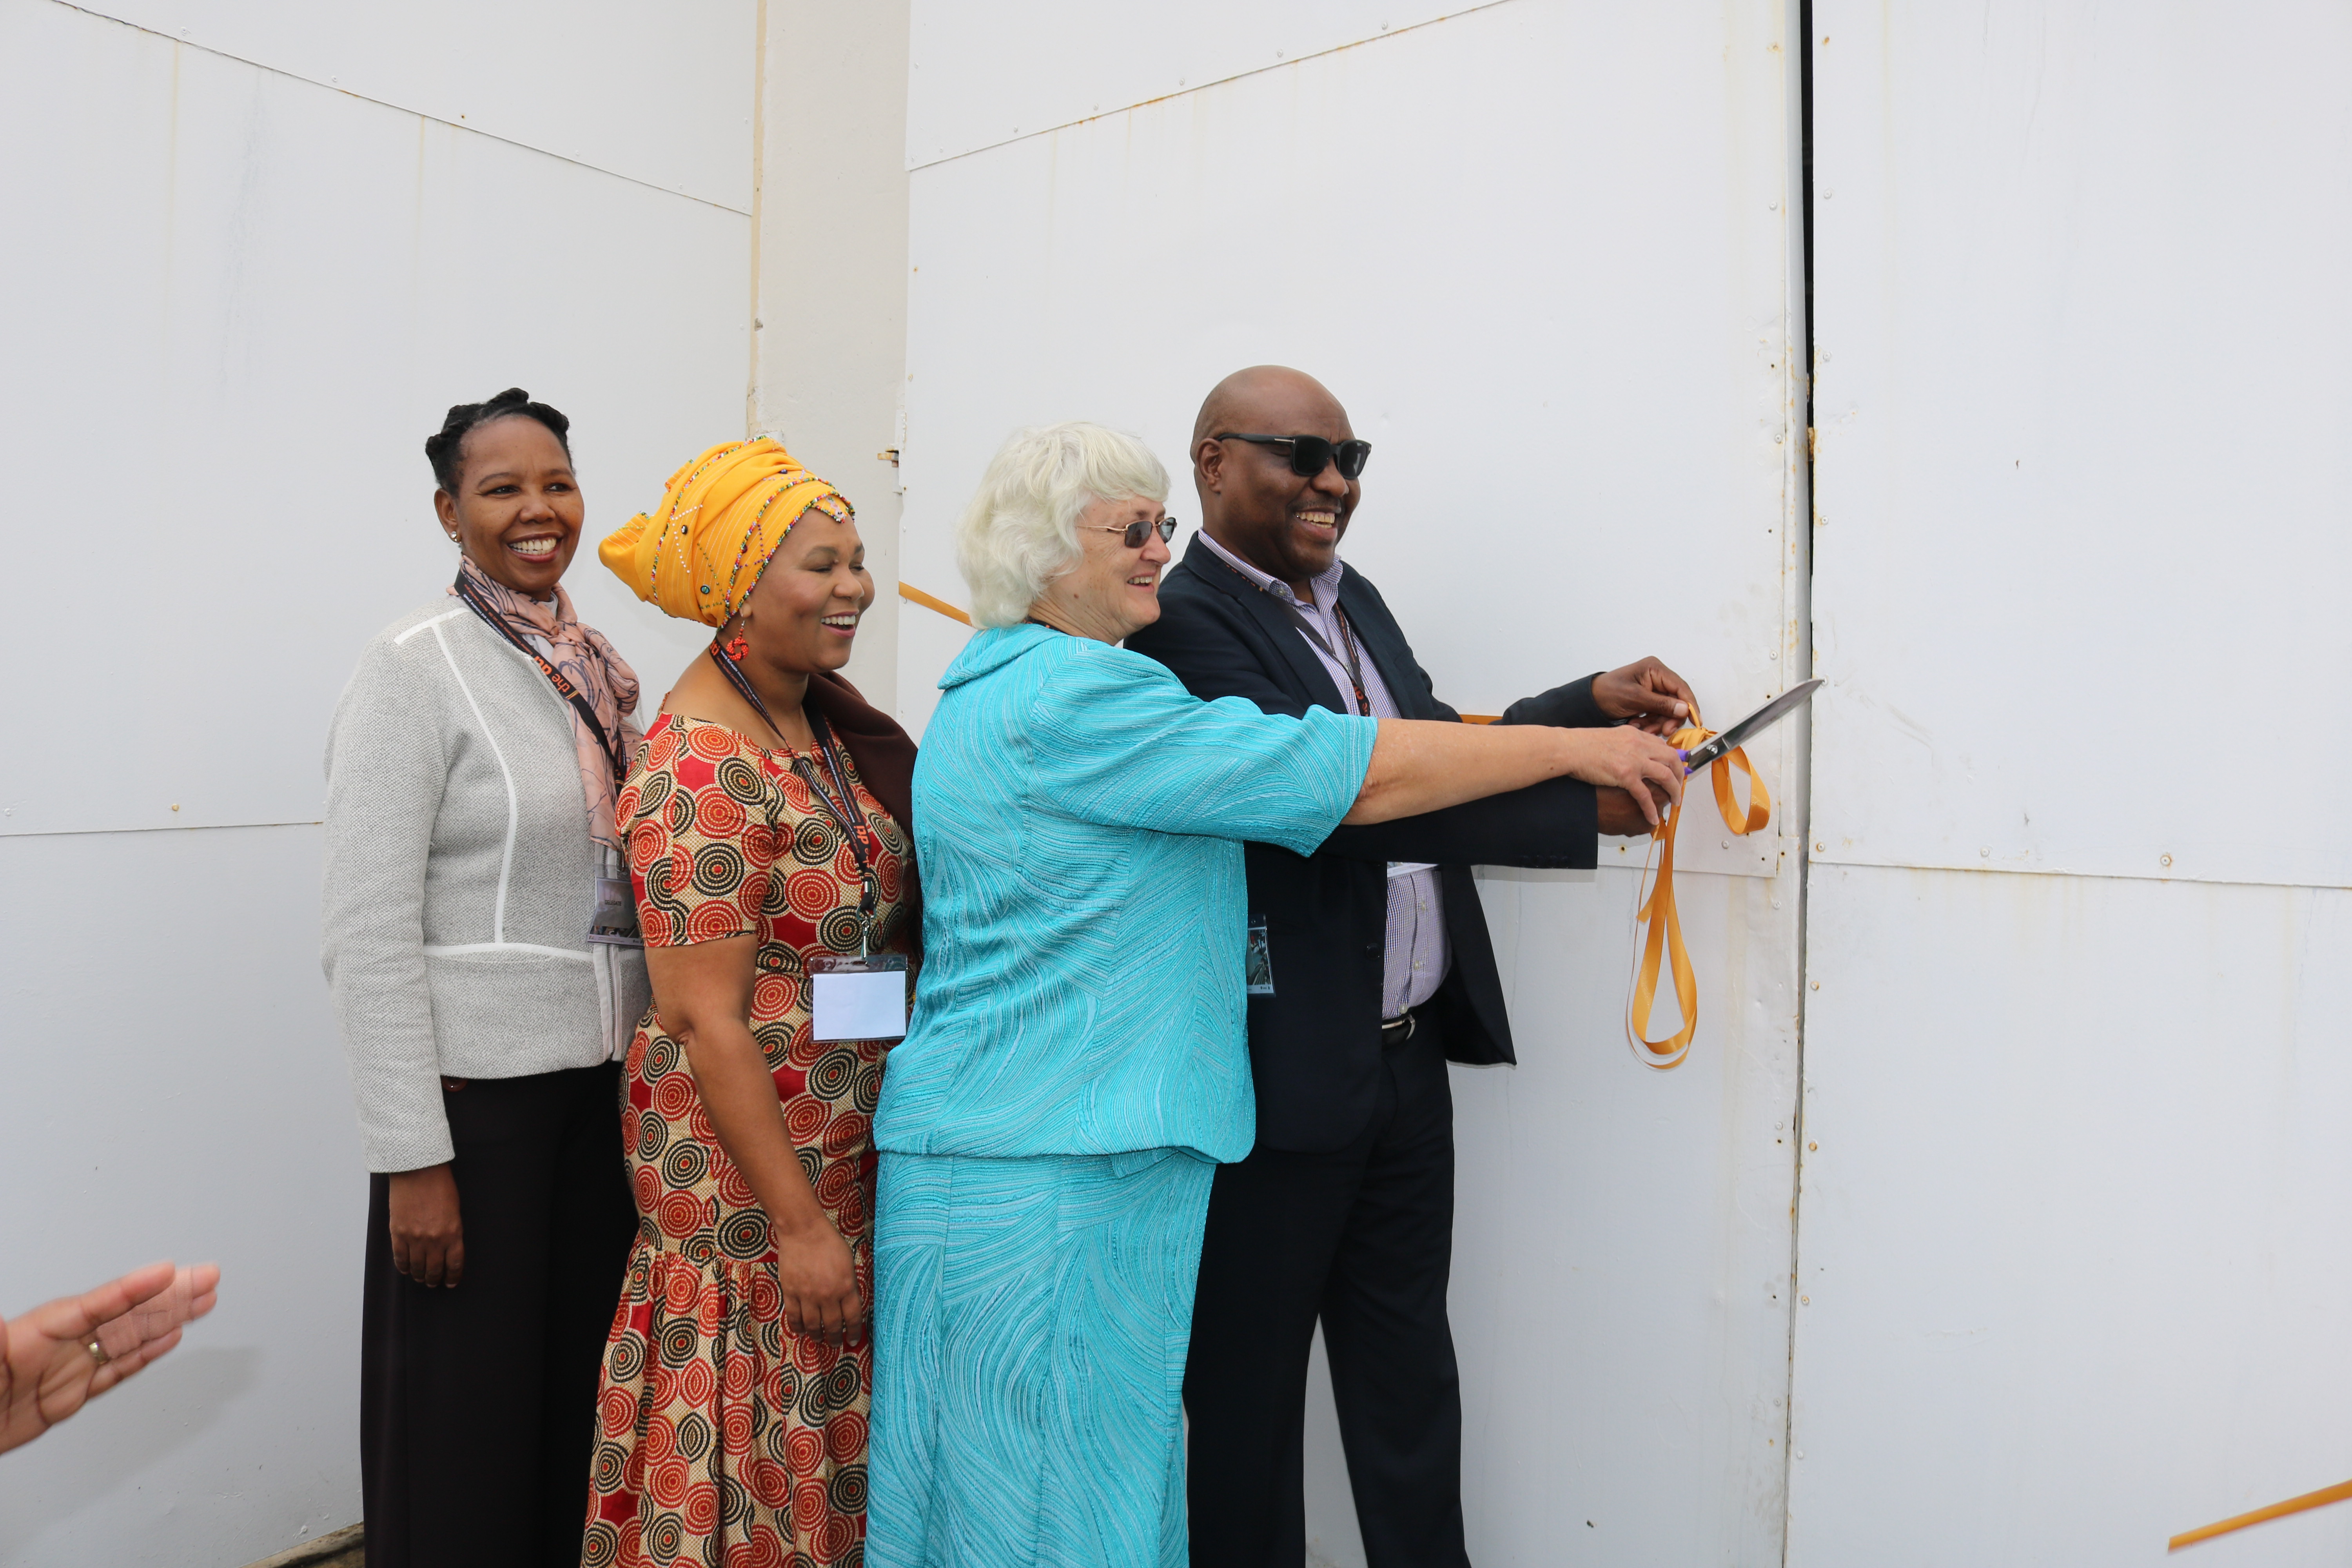 Above: The dti Deputy Minister, Lovedale Acting Principal, DHET Represantative and Lovedale Academic staff cut the ribbon.